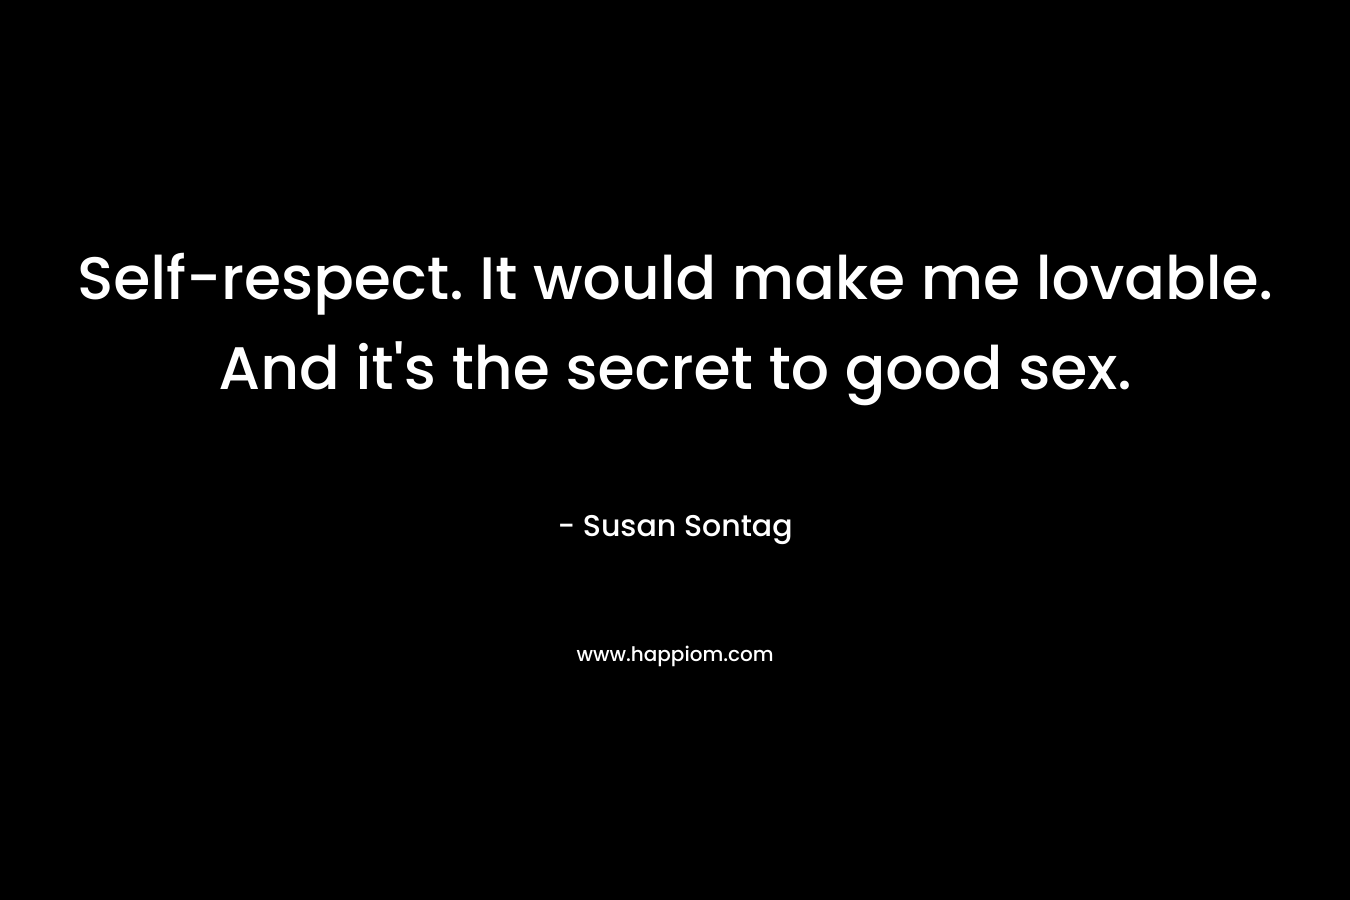 Self-respect. It would make me lovable. And it's the secret to good sex.